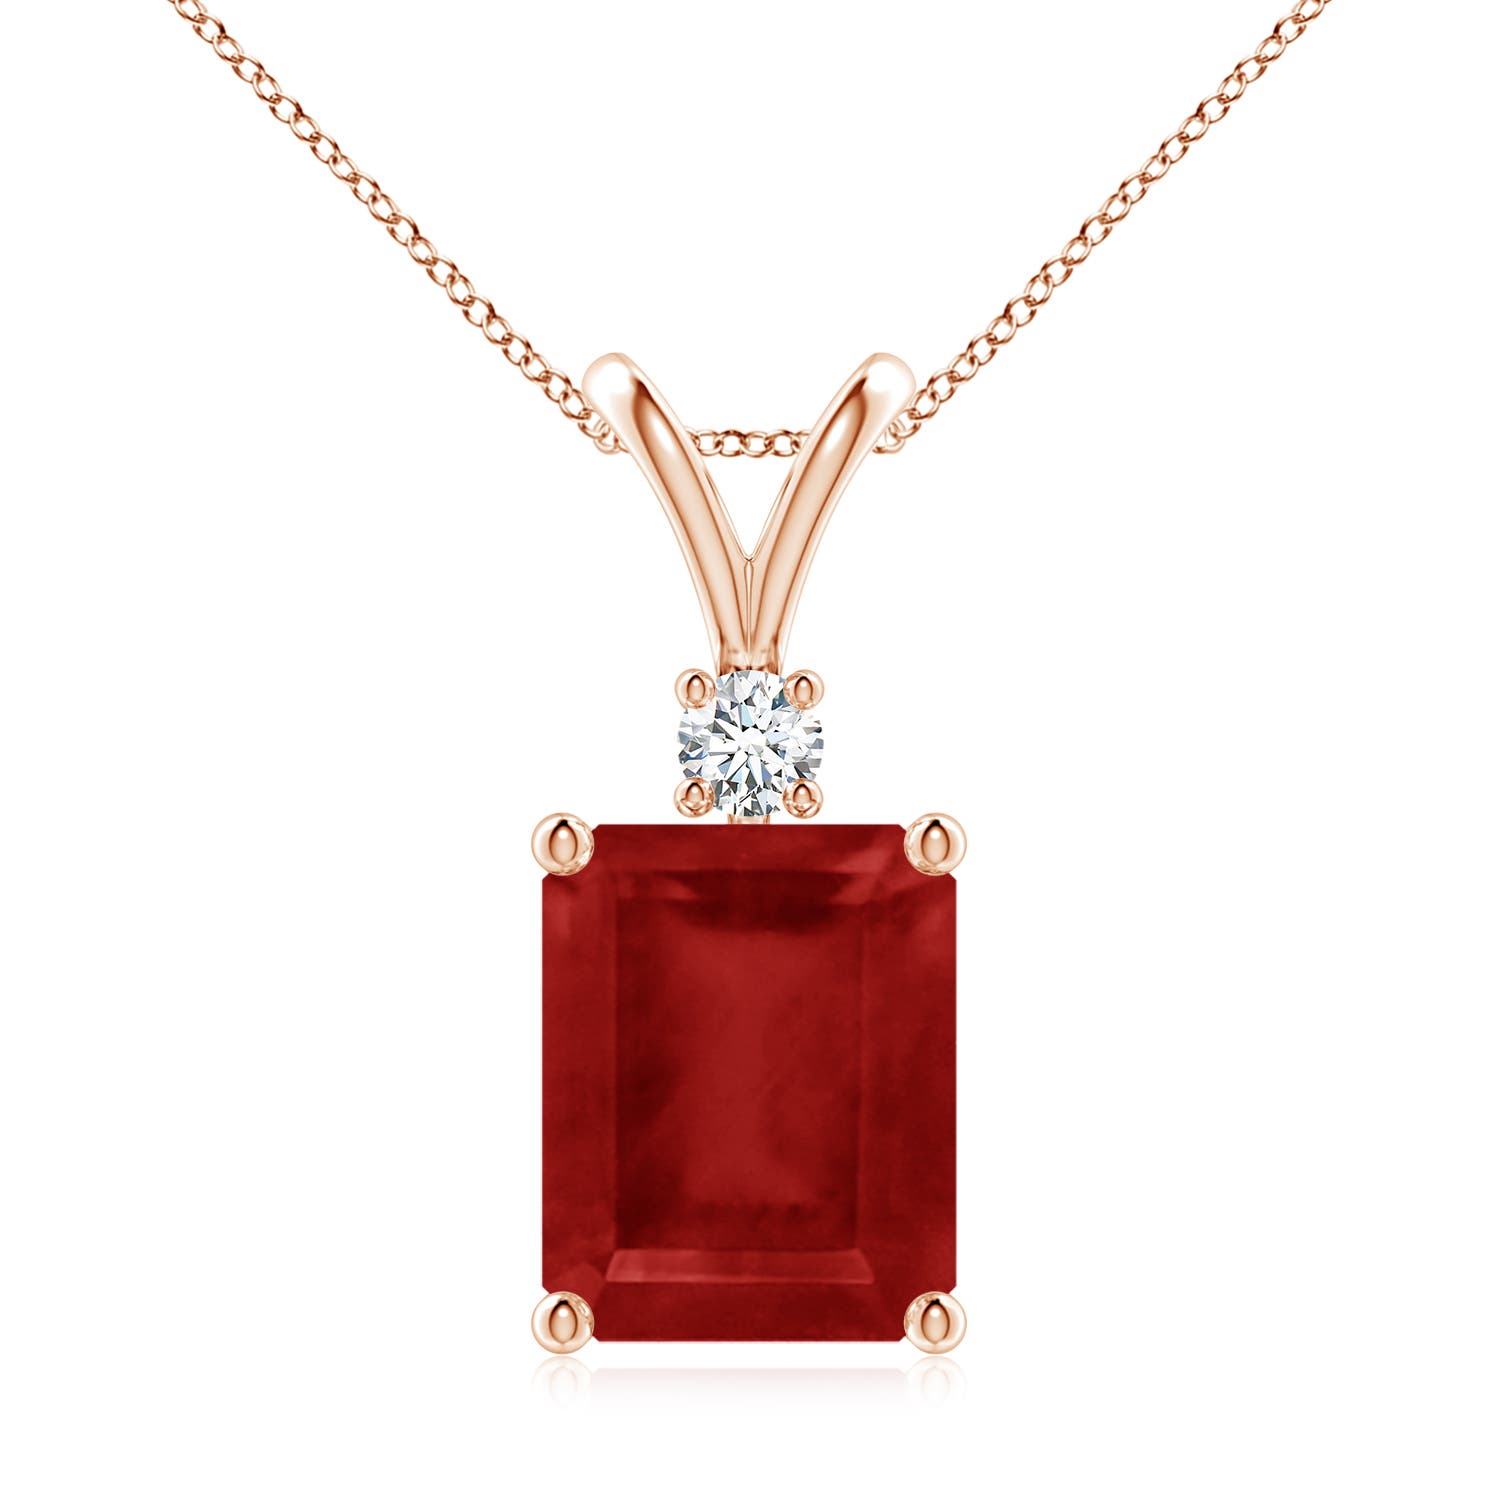 AA - Ruby / 4.11 CT / 14 KT Rose Gold